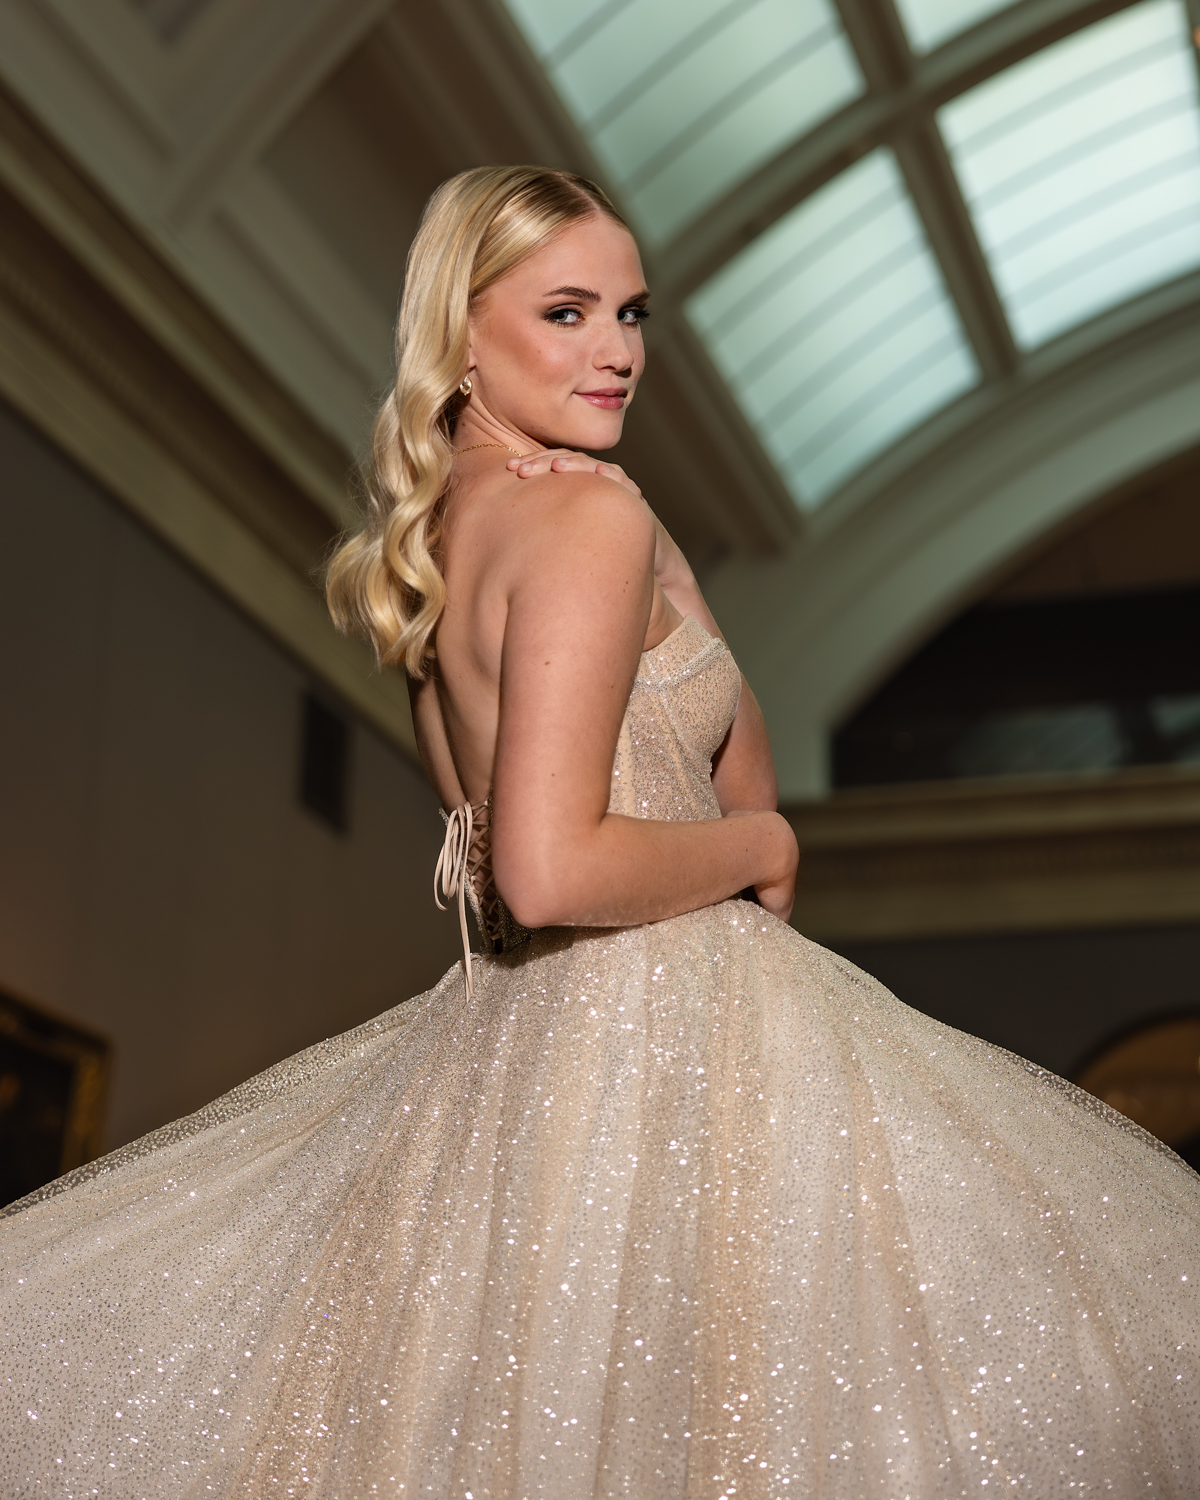 High School Senior Girl posing in a champagne colored Polardi gown at the Cleveland Museum of Art during a senior photo session